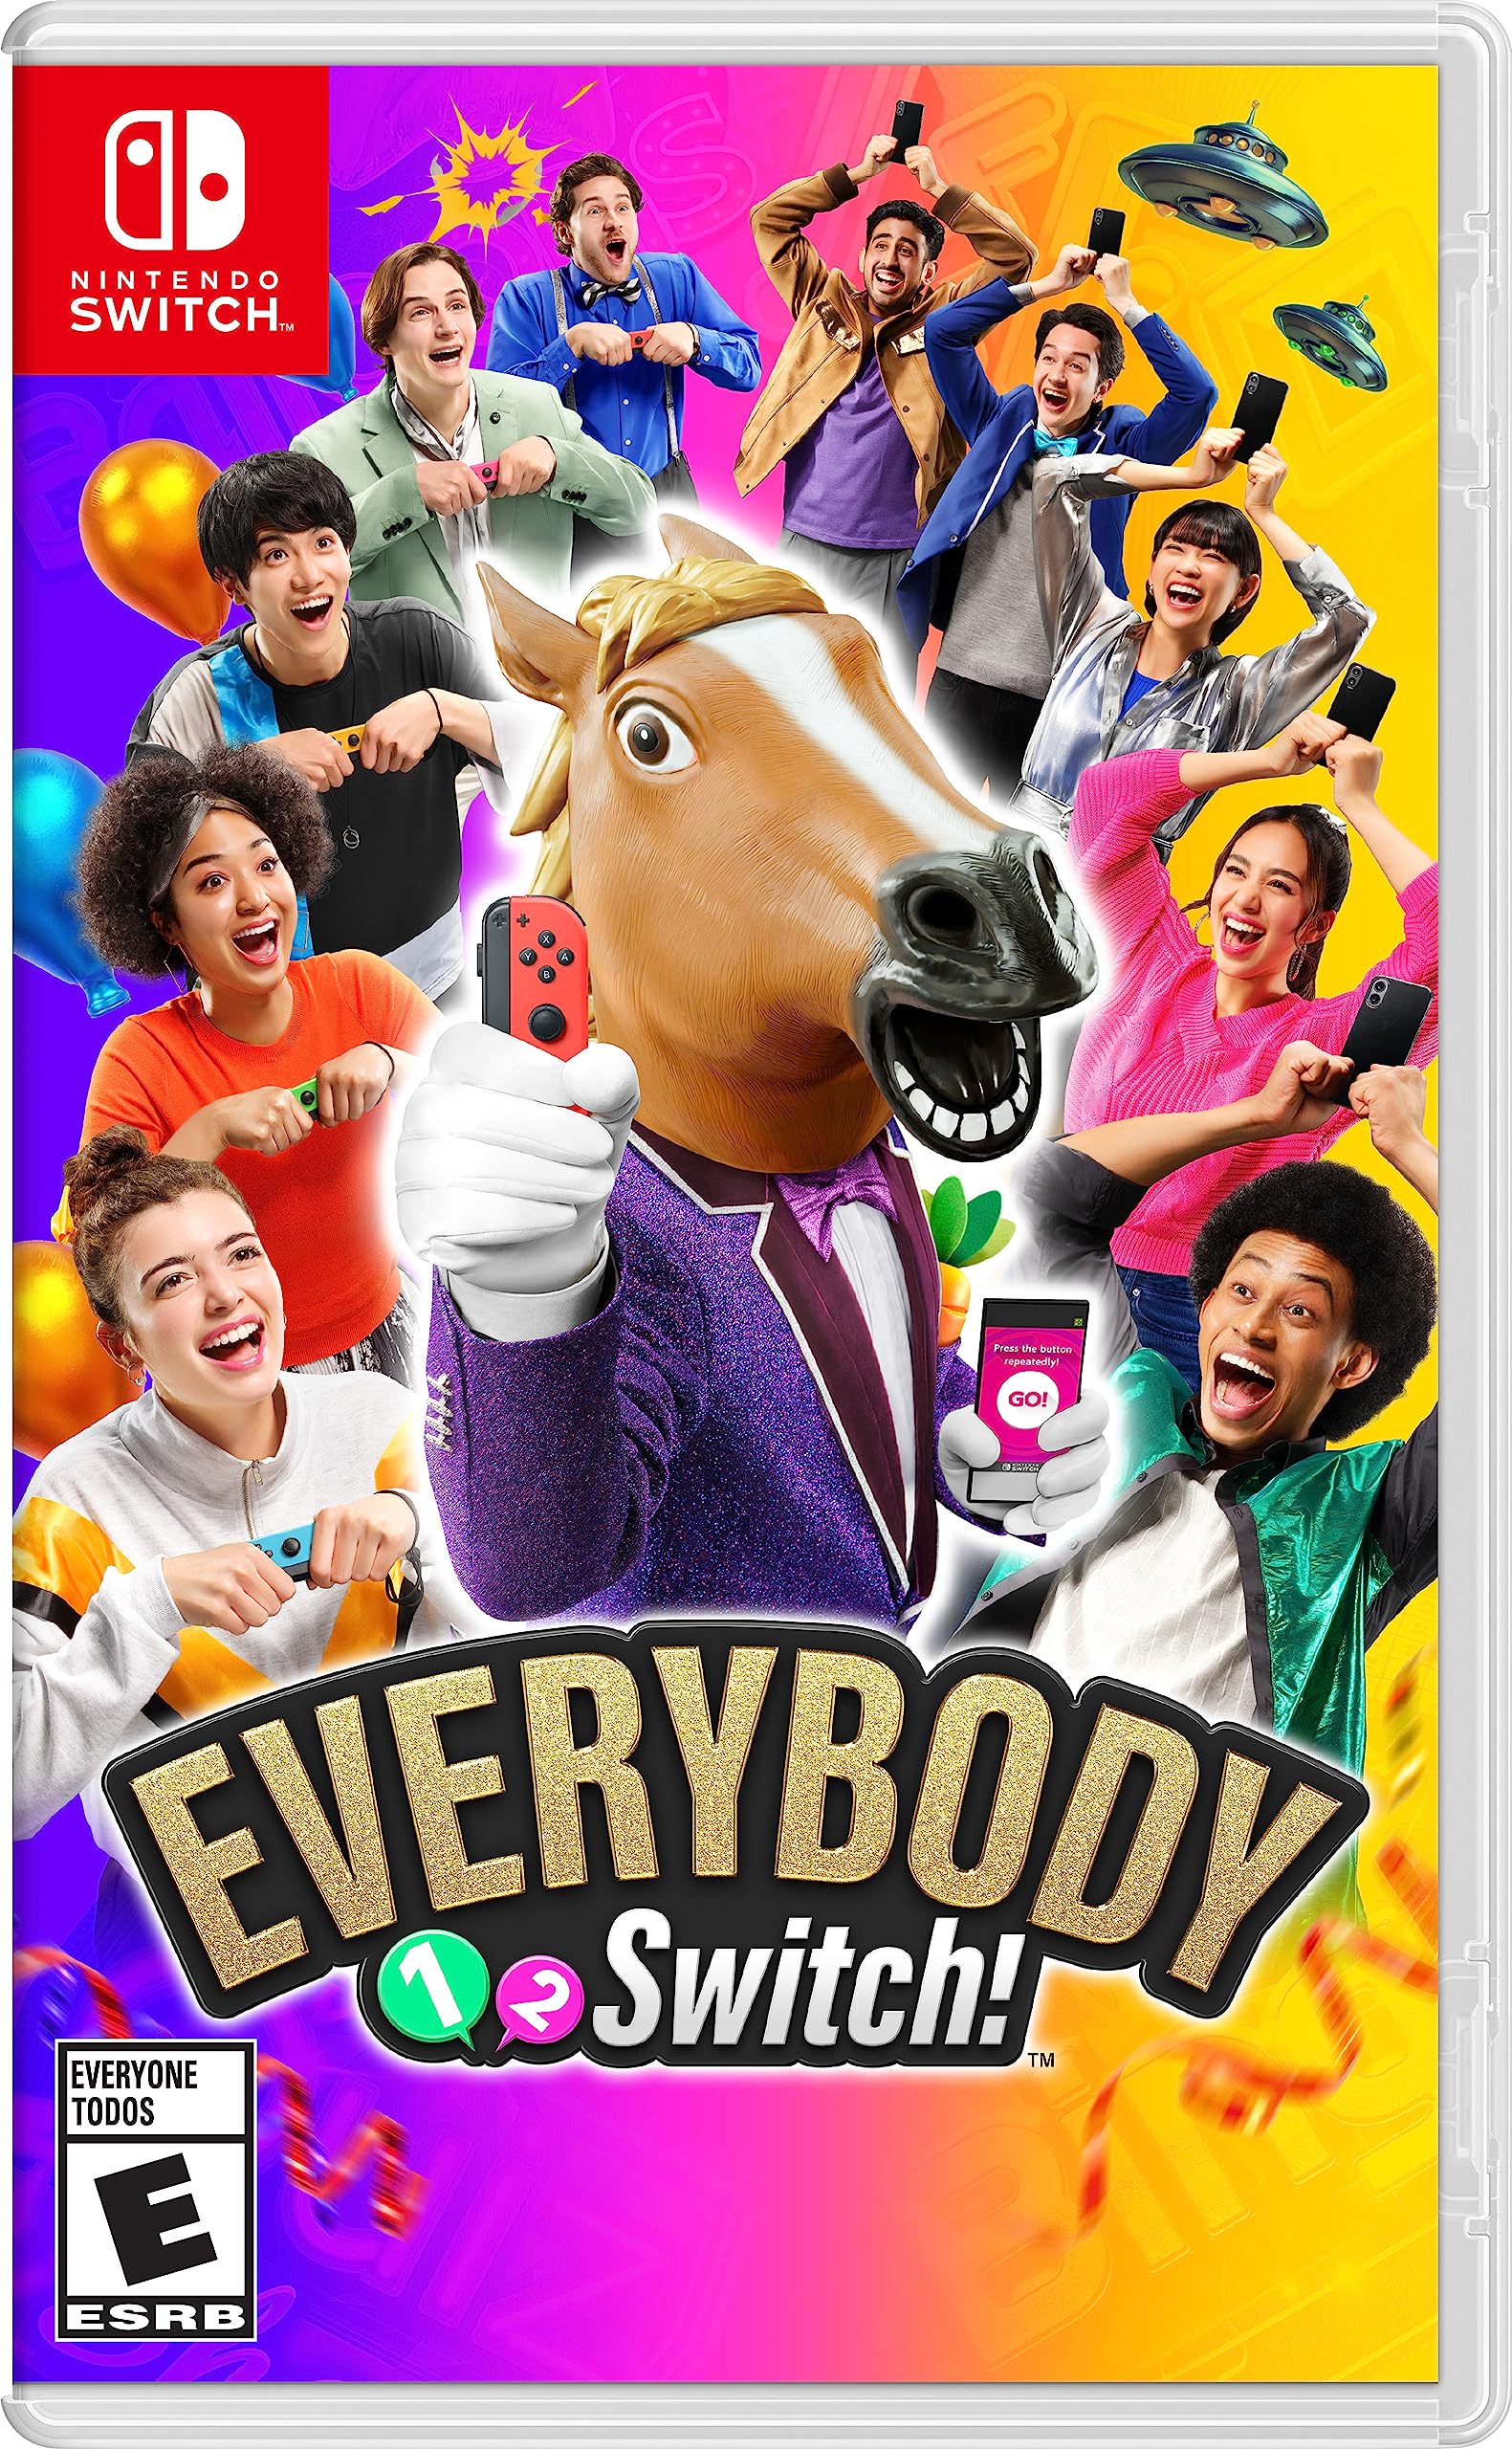 Everybody 1-2 Switch! (Nintendo Switch, Physical) $20 + Free Shipping w/ Prime or on orders over $35